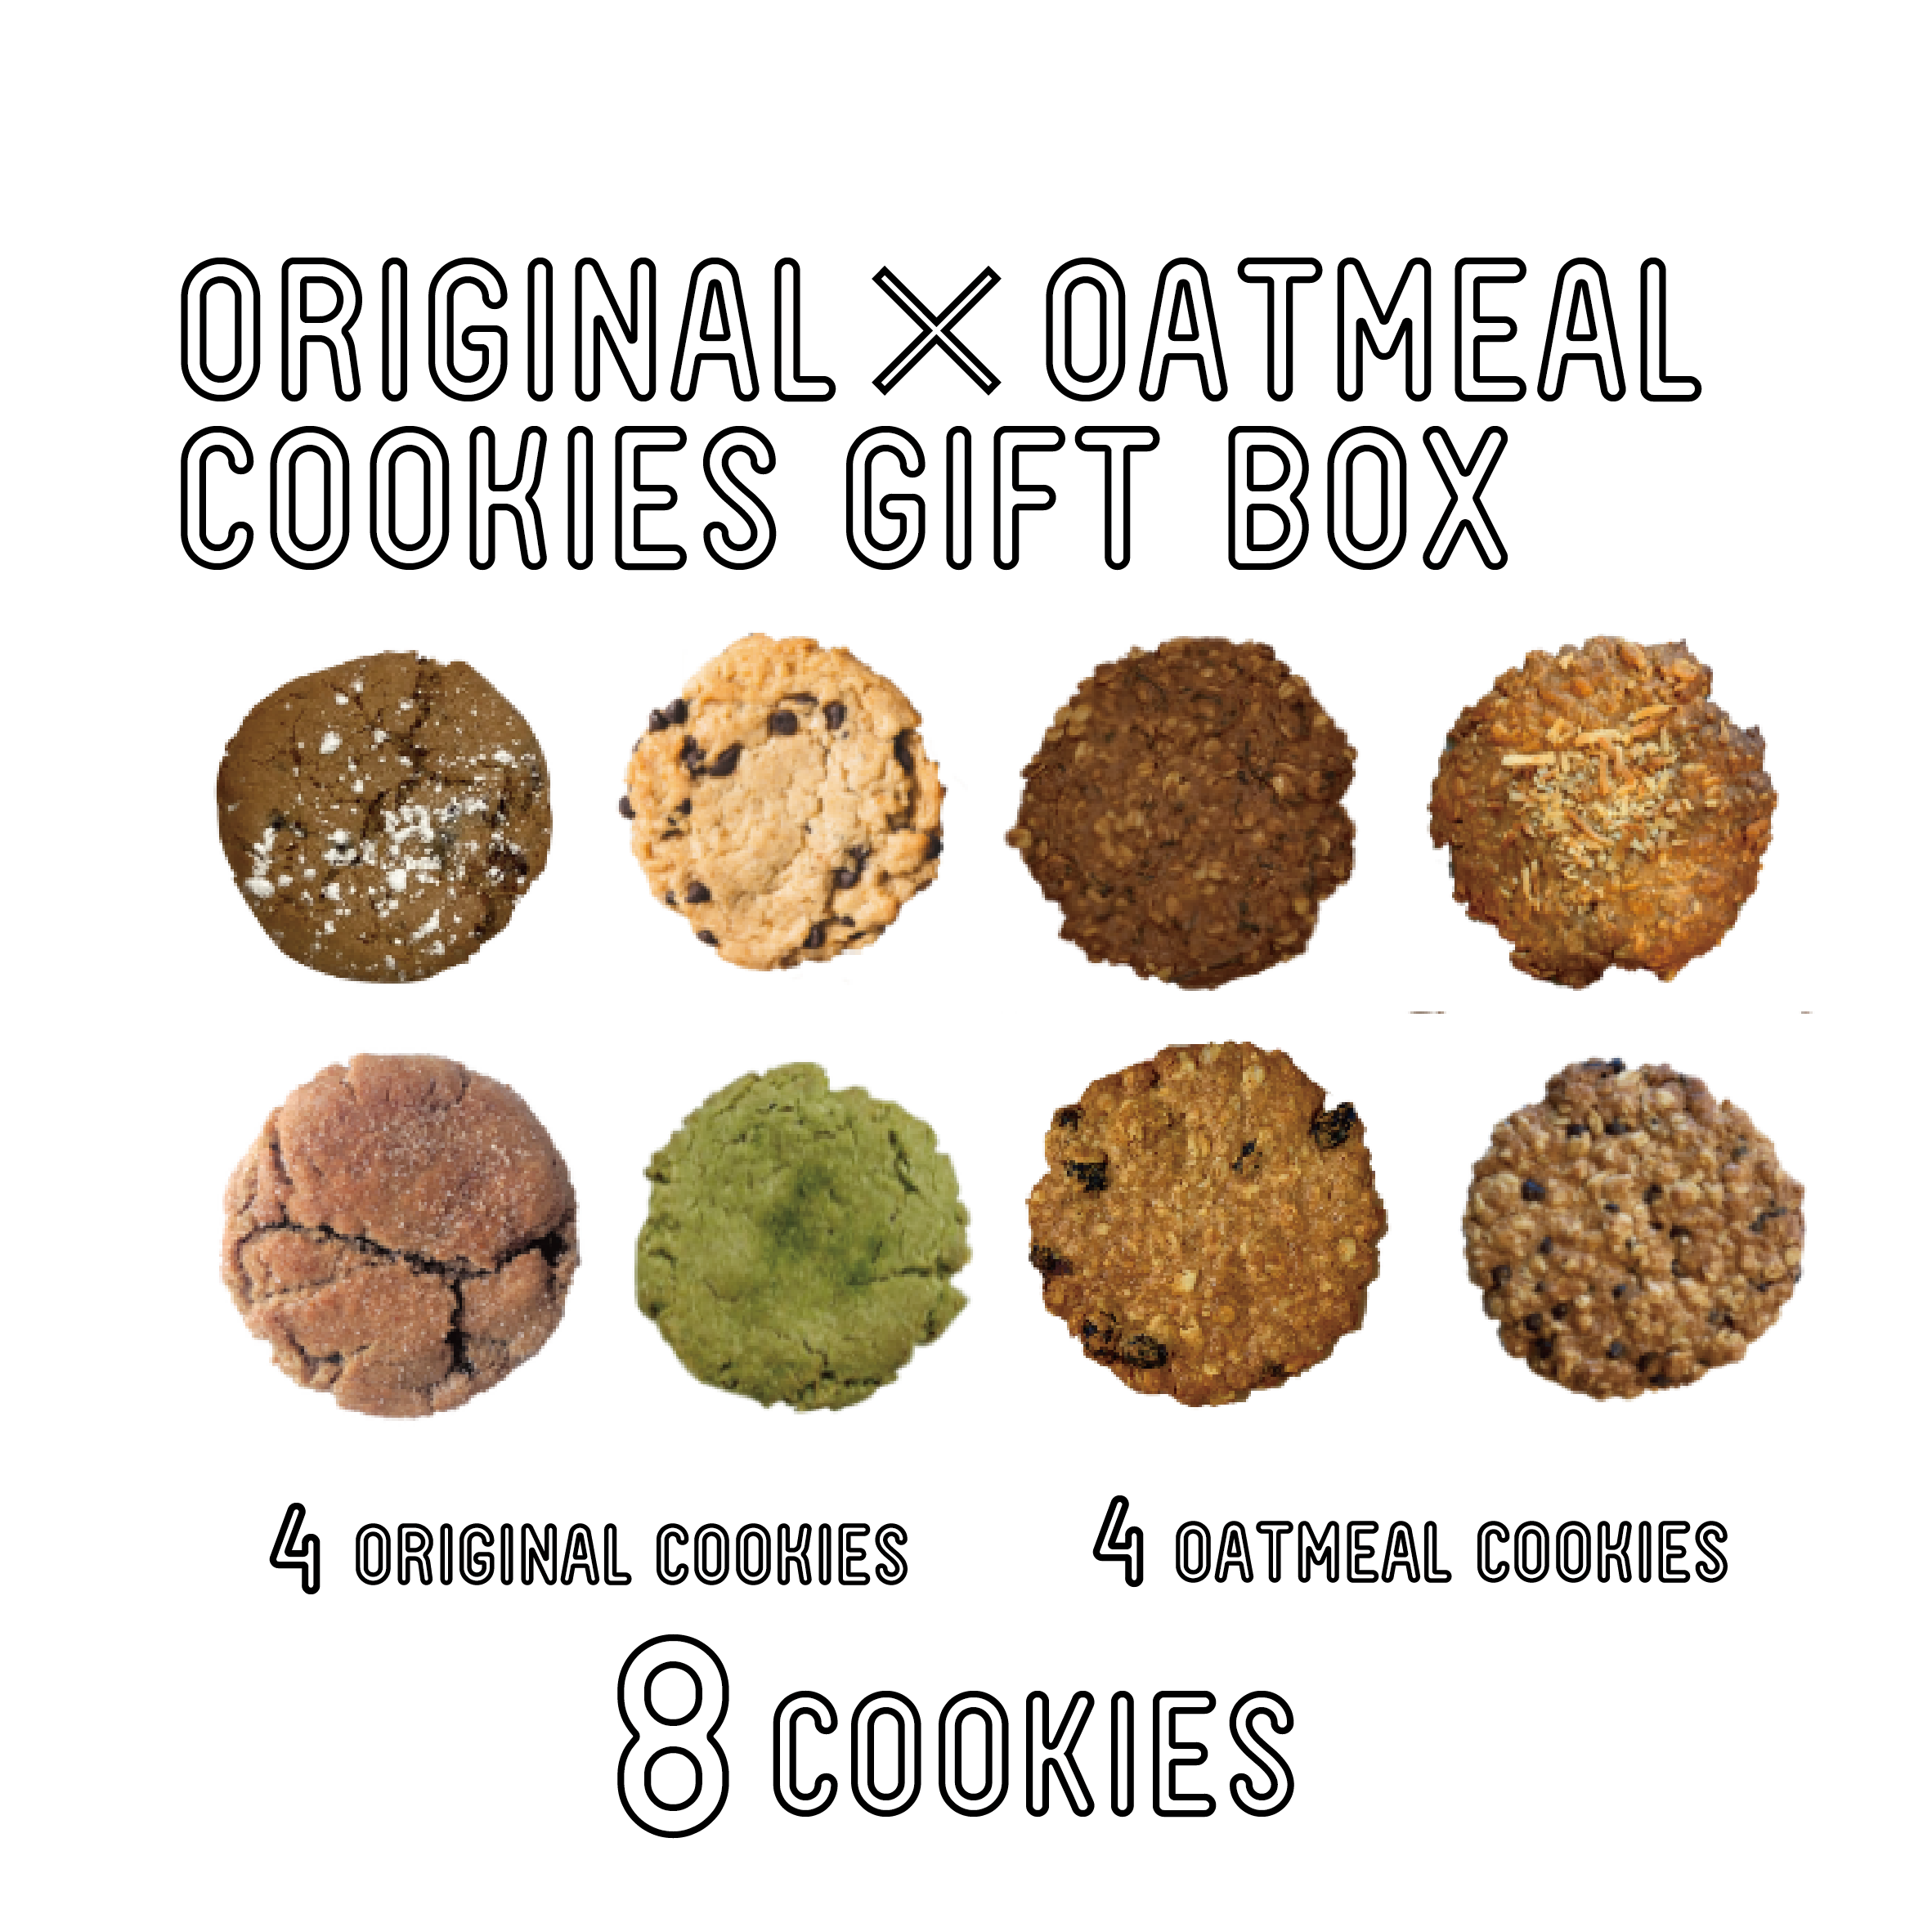 [8 pieces] Original x oatmeal gifts (4 soft cookies / 4 oatmeal cookies)